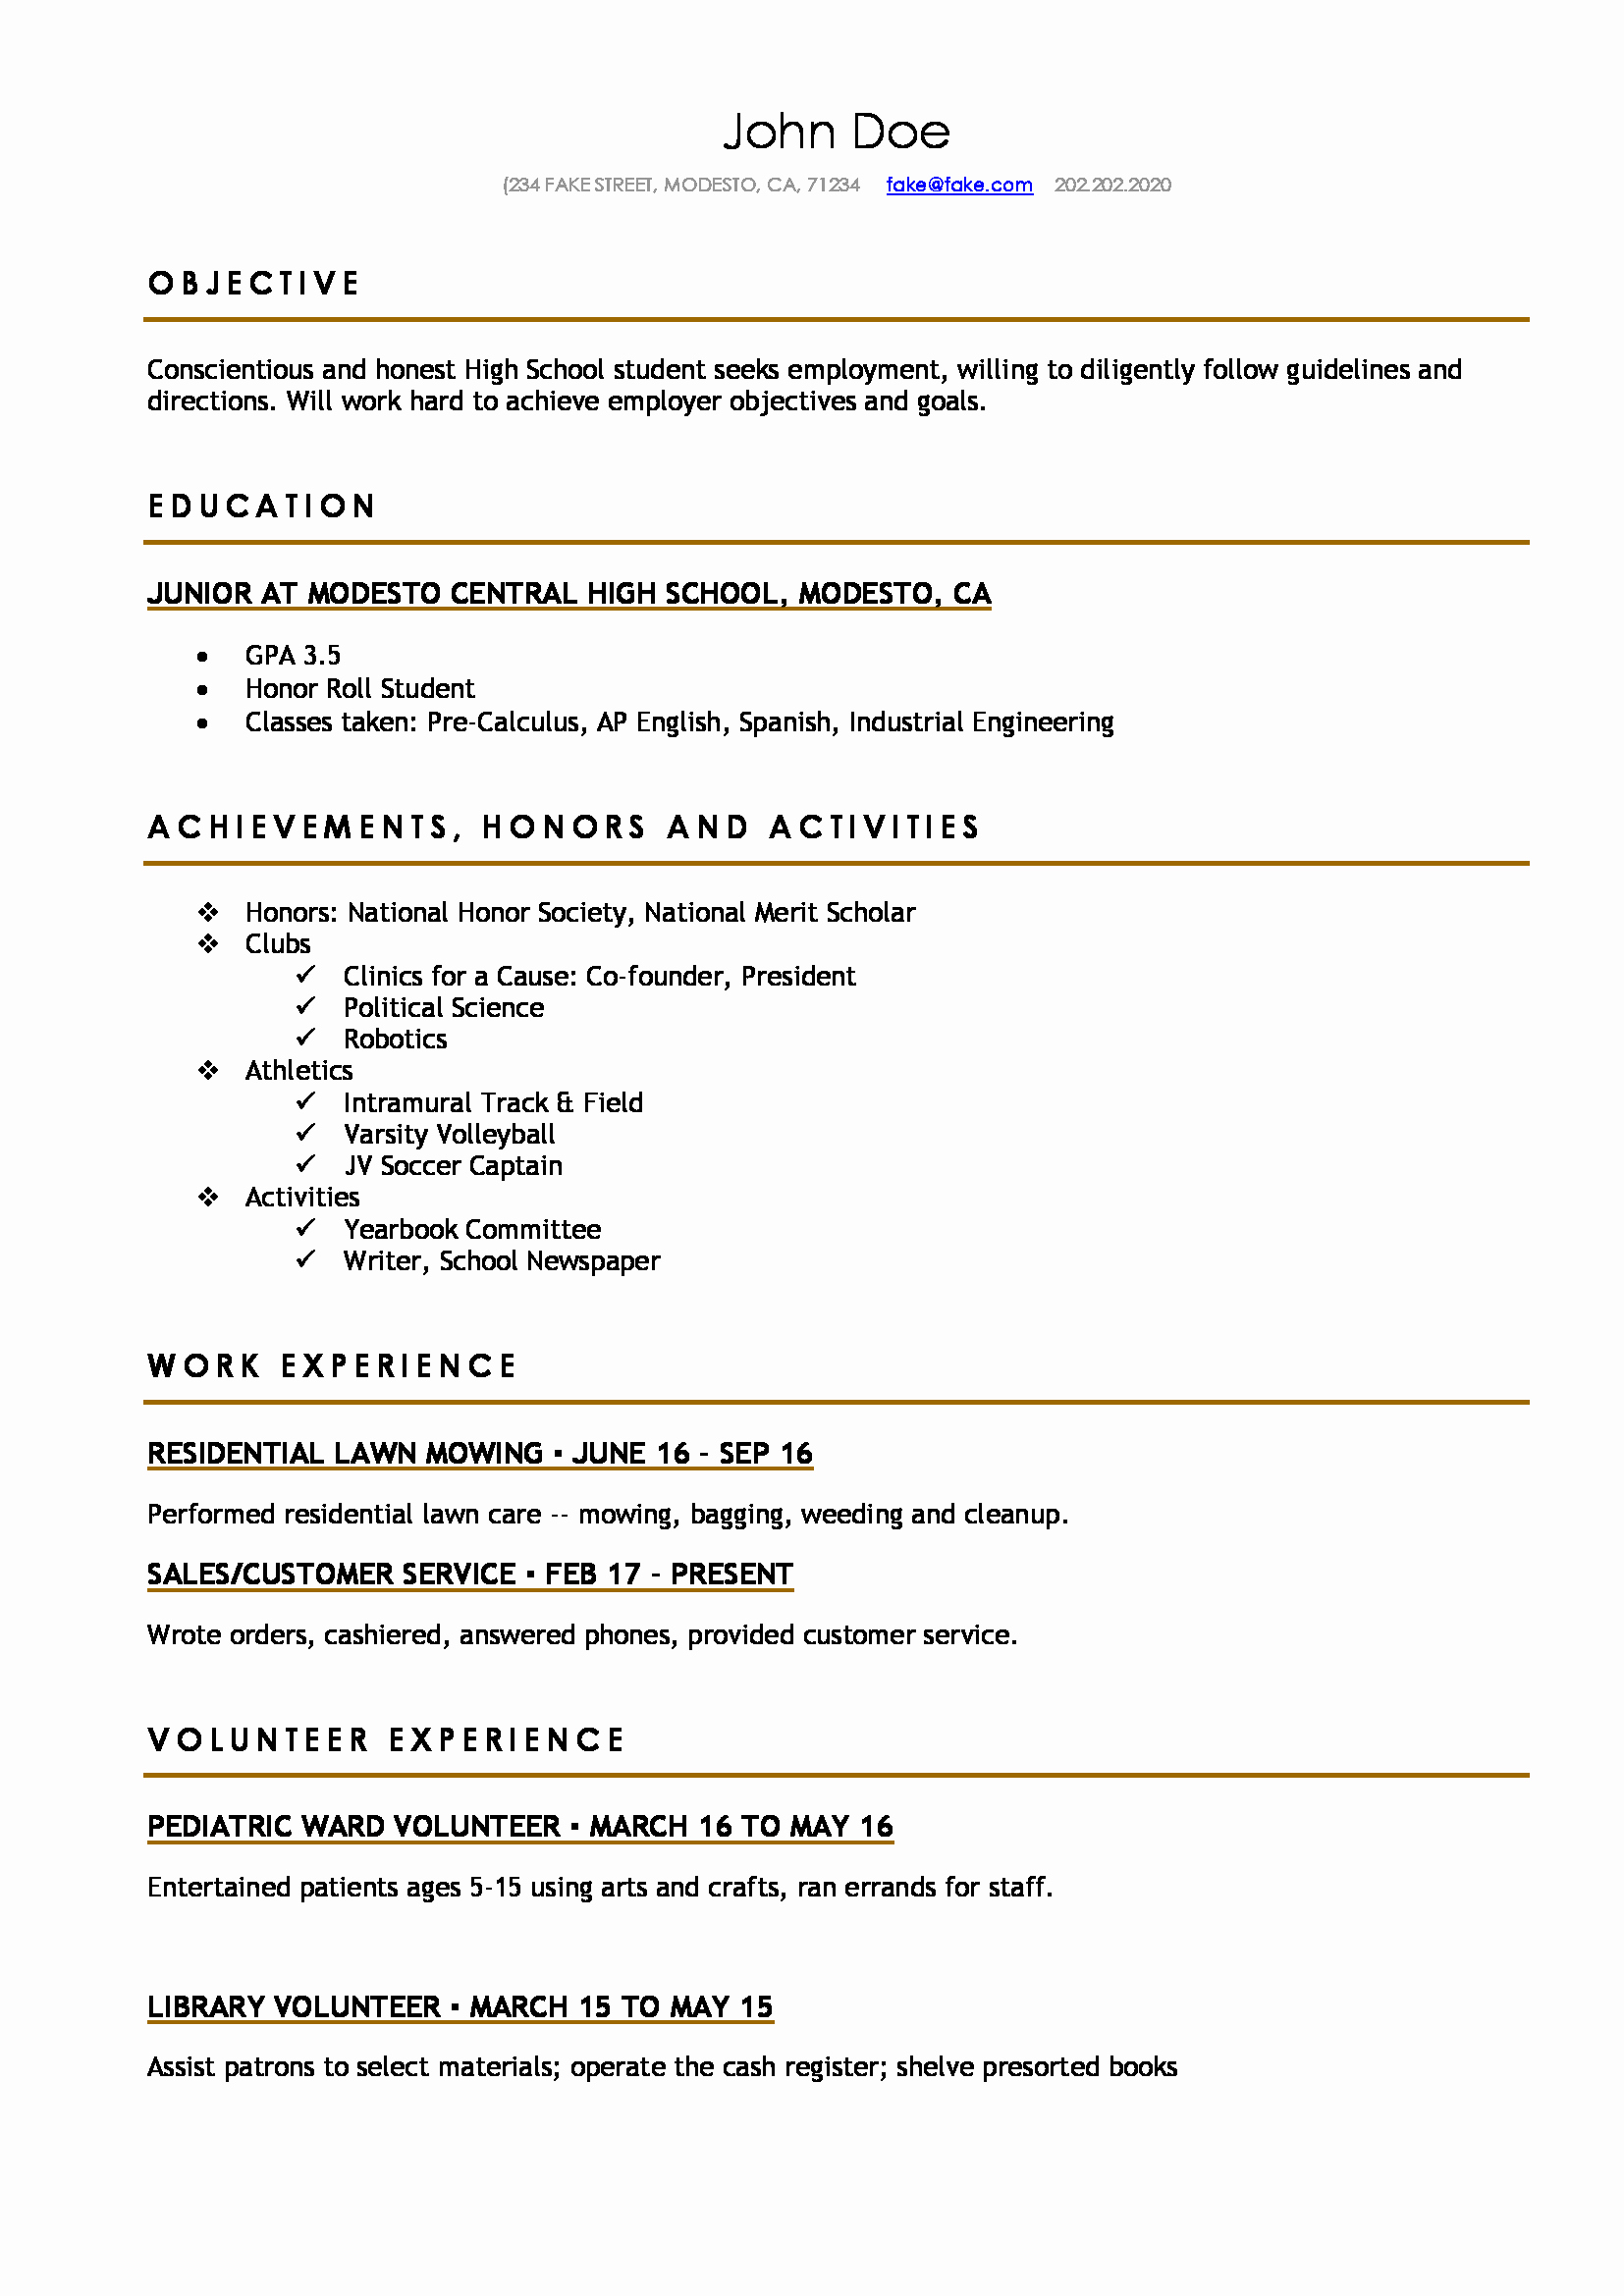 Resume Examples for Highschool Students Elegant High School Resume Resumes Perfect for High School Students